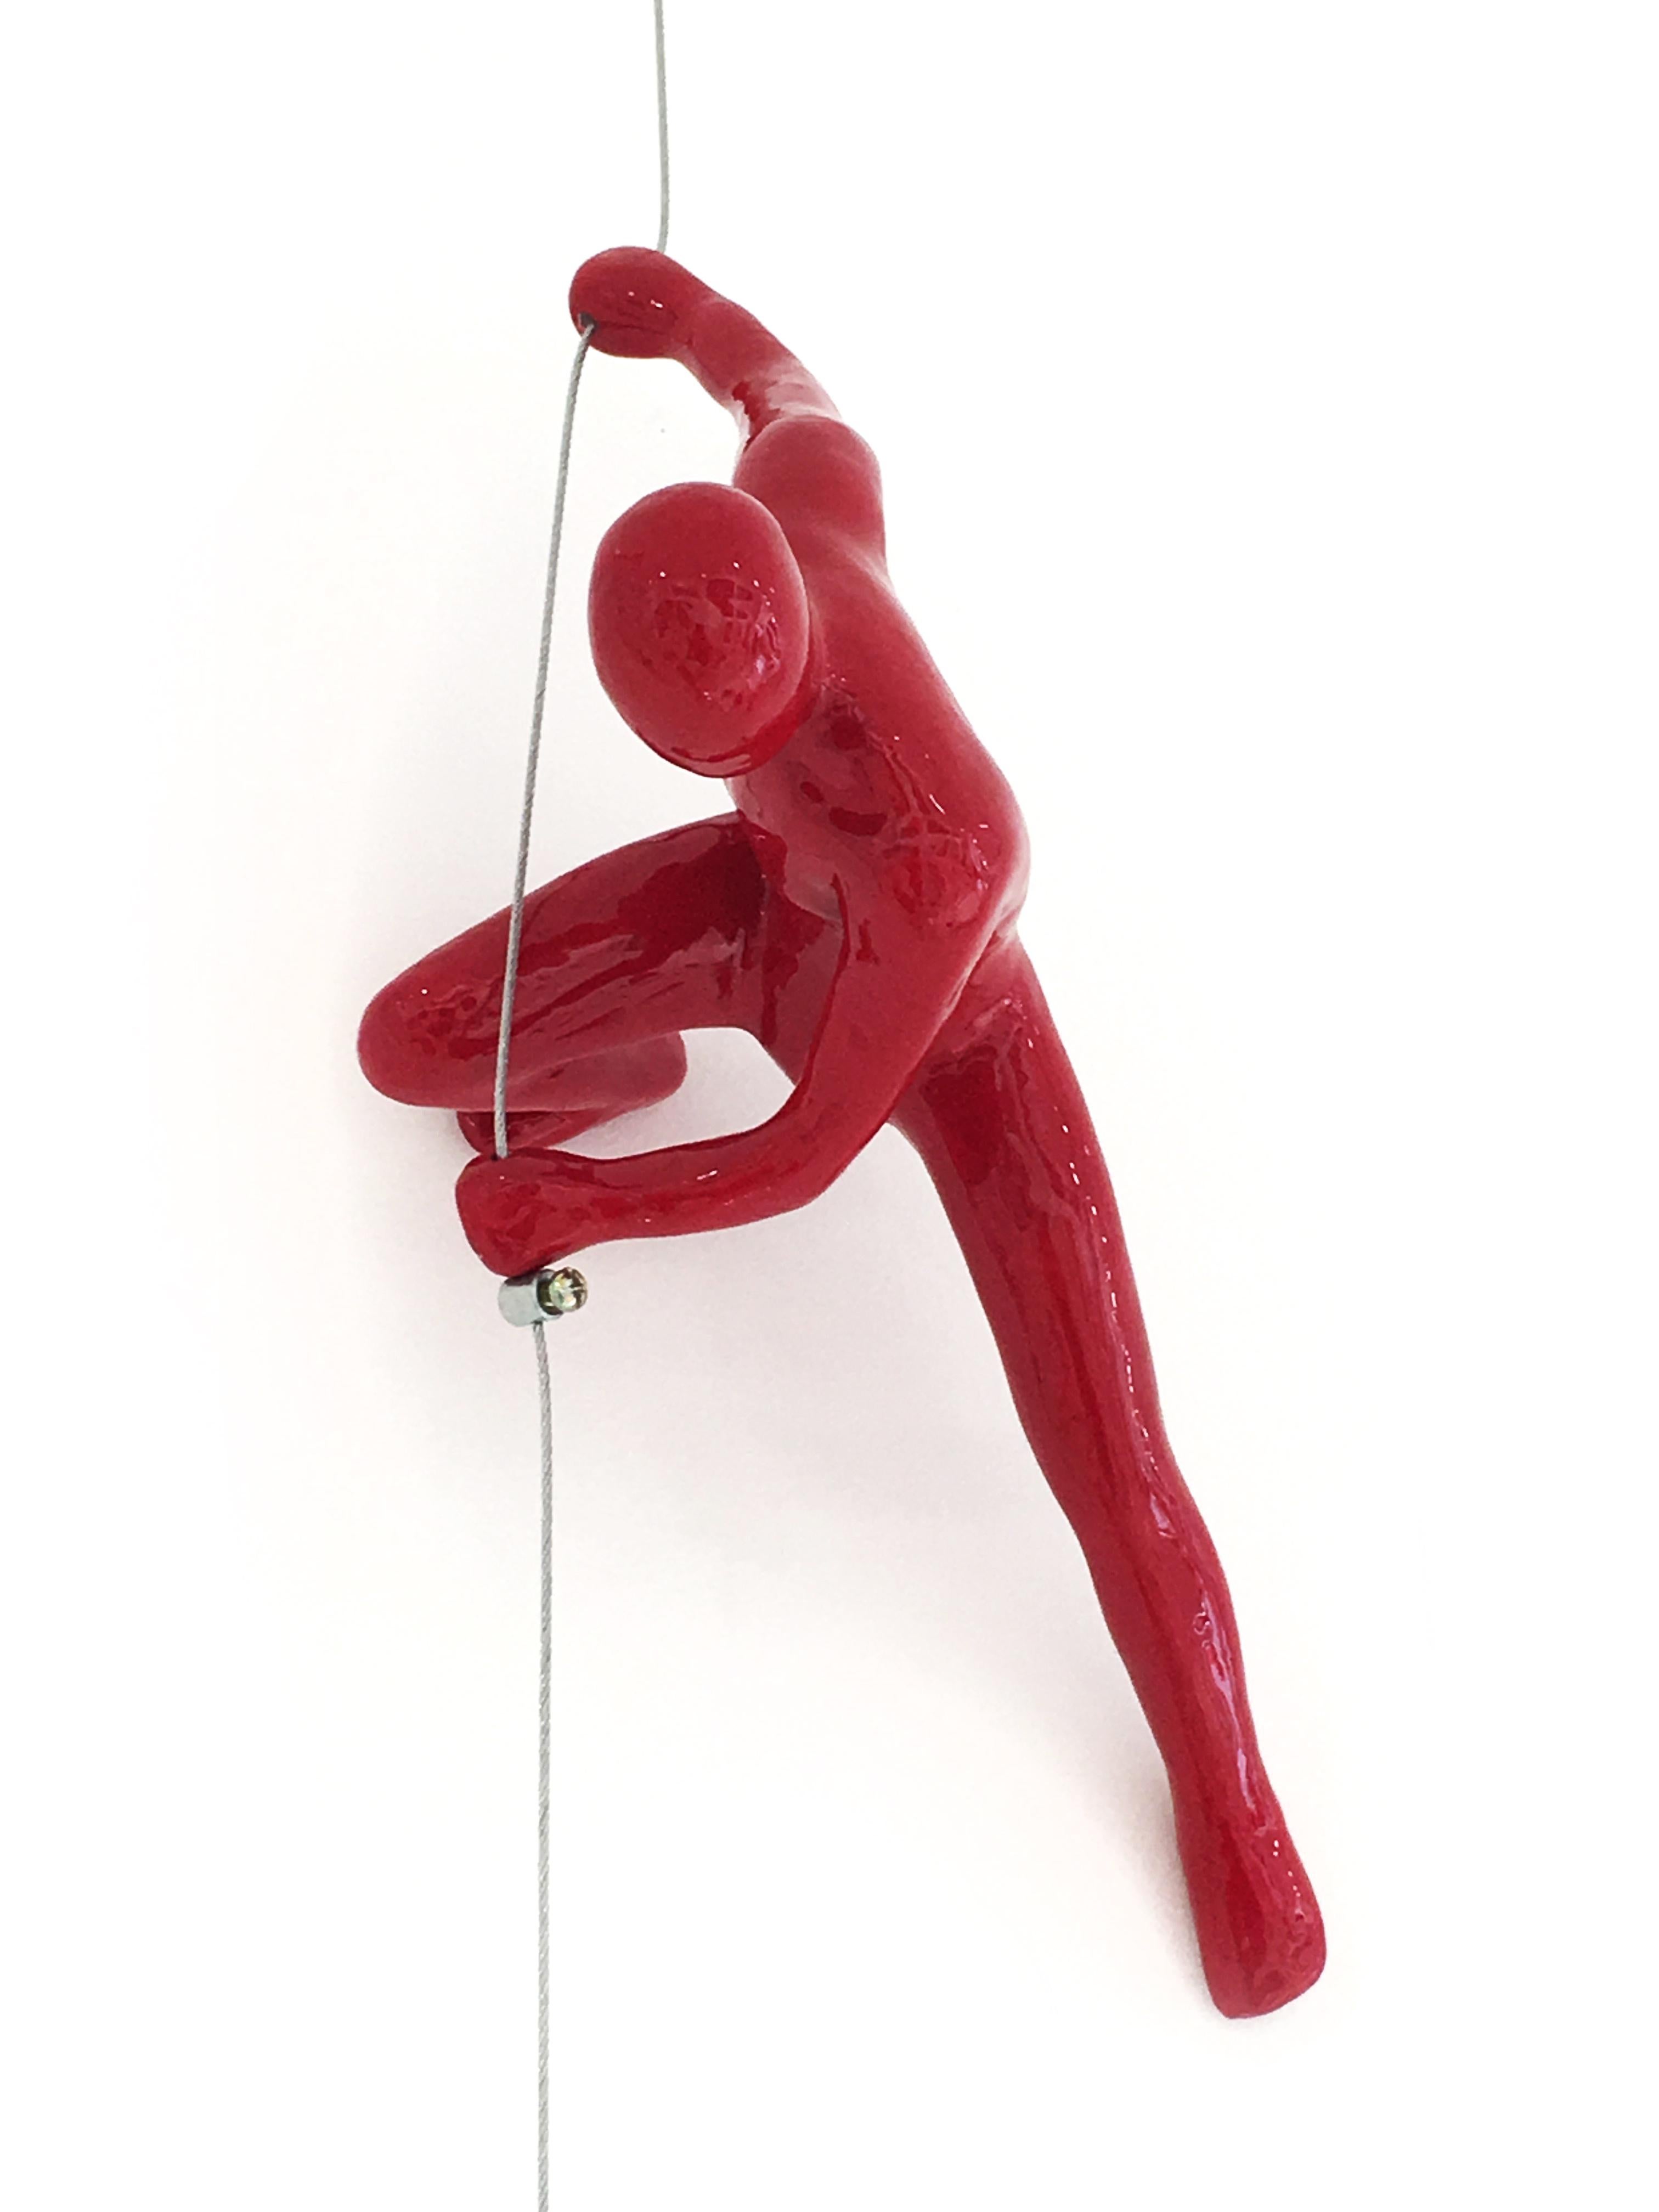 Climber 12 (Red), Resin